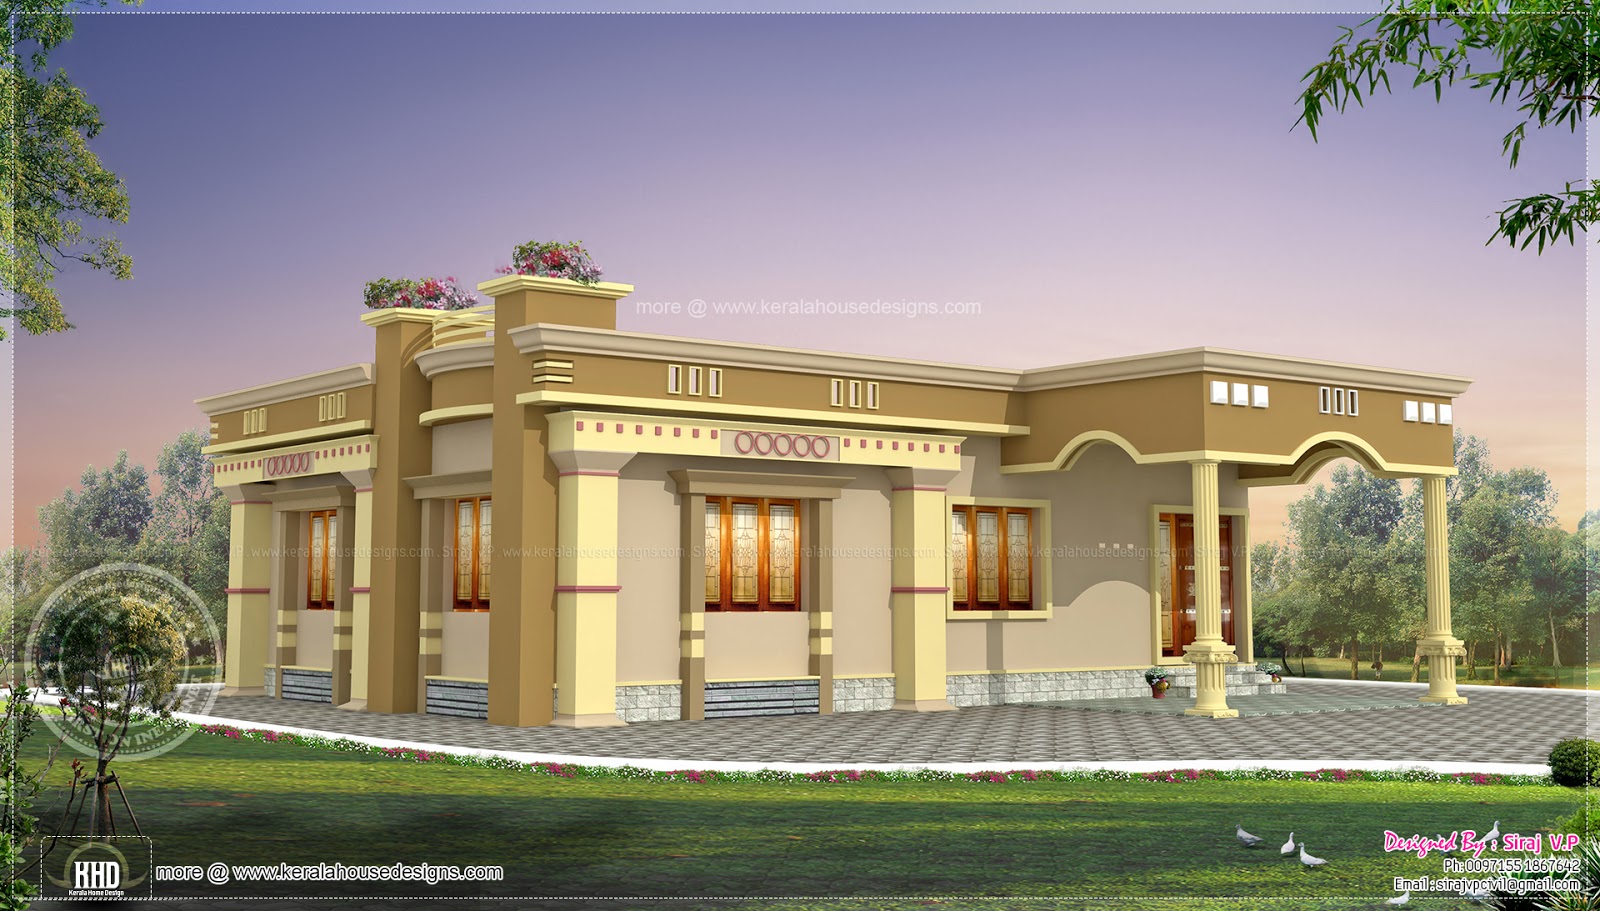  Small  South Indian Home  design  Home  Kerala  Plans 